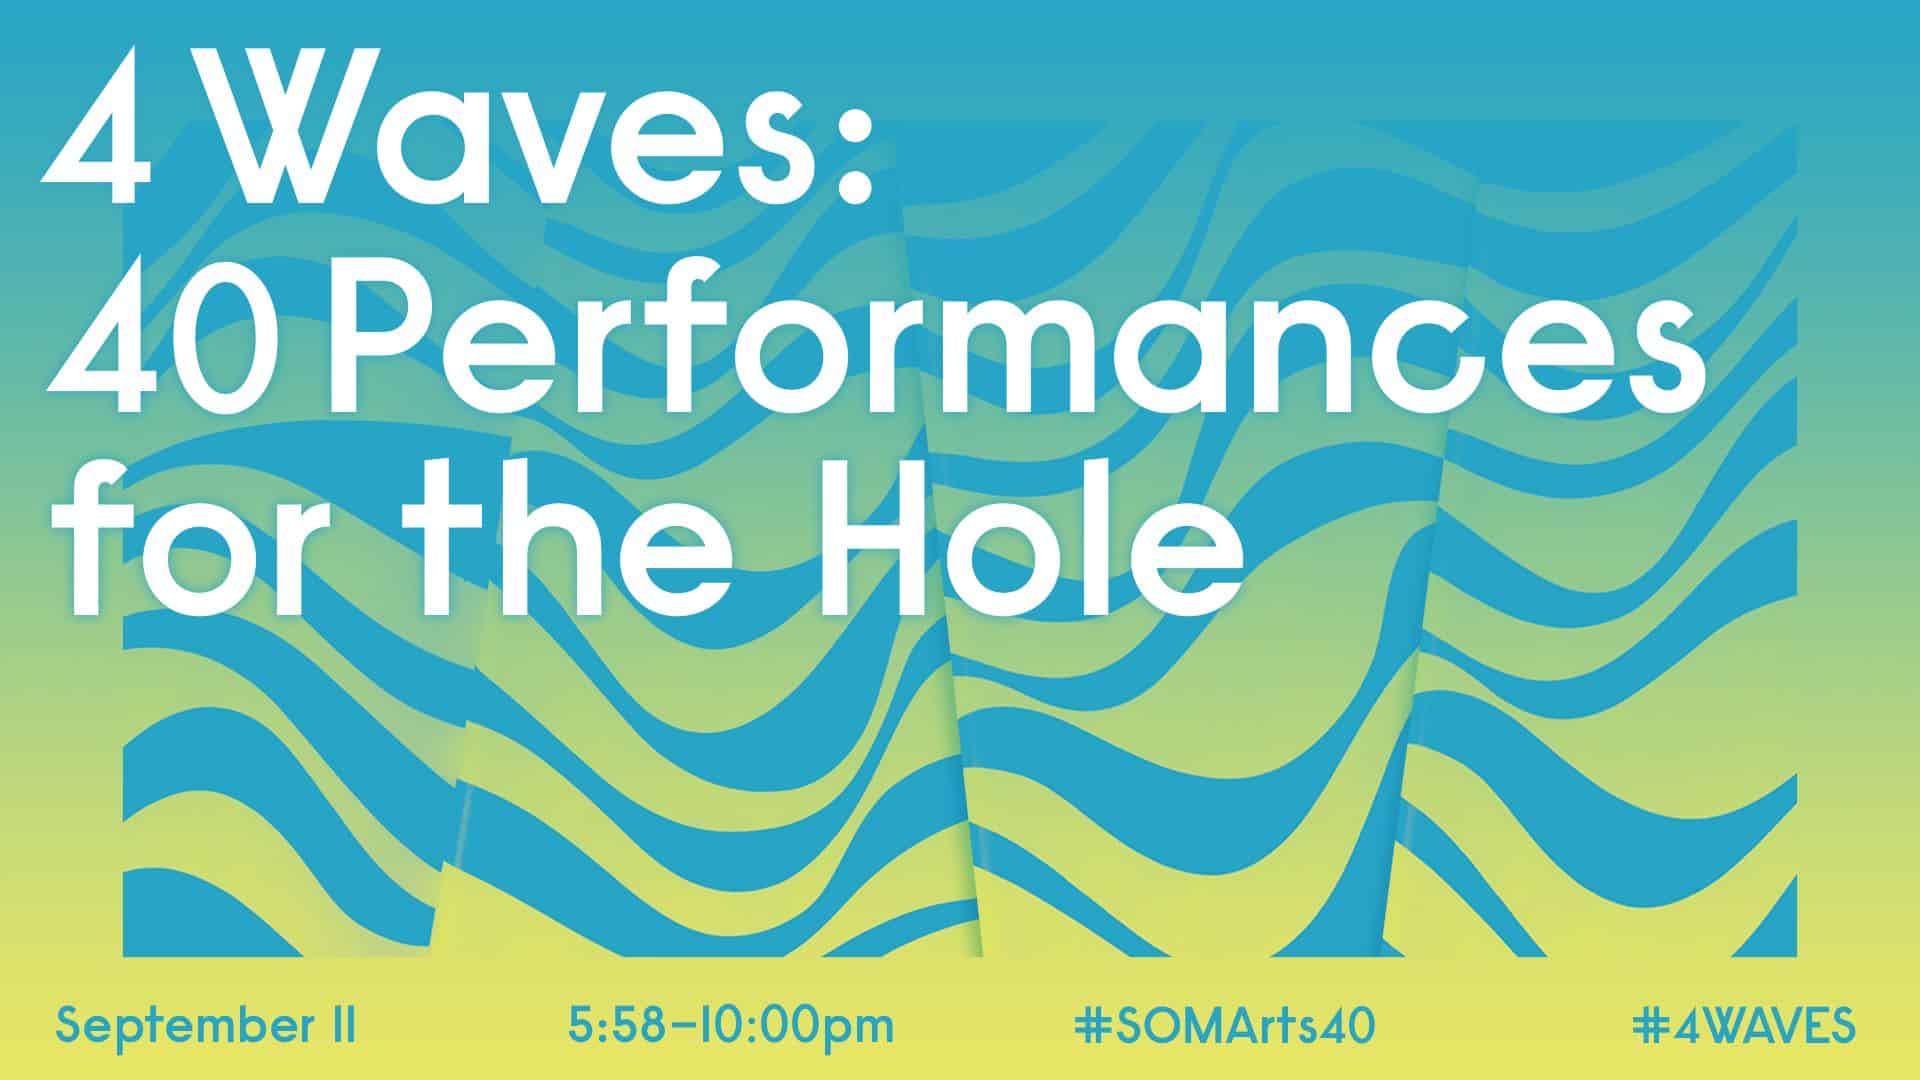 Press Release: 4Waves: 40 Performances for the Hole